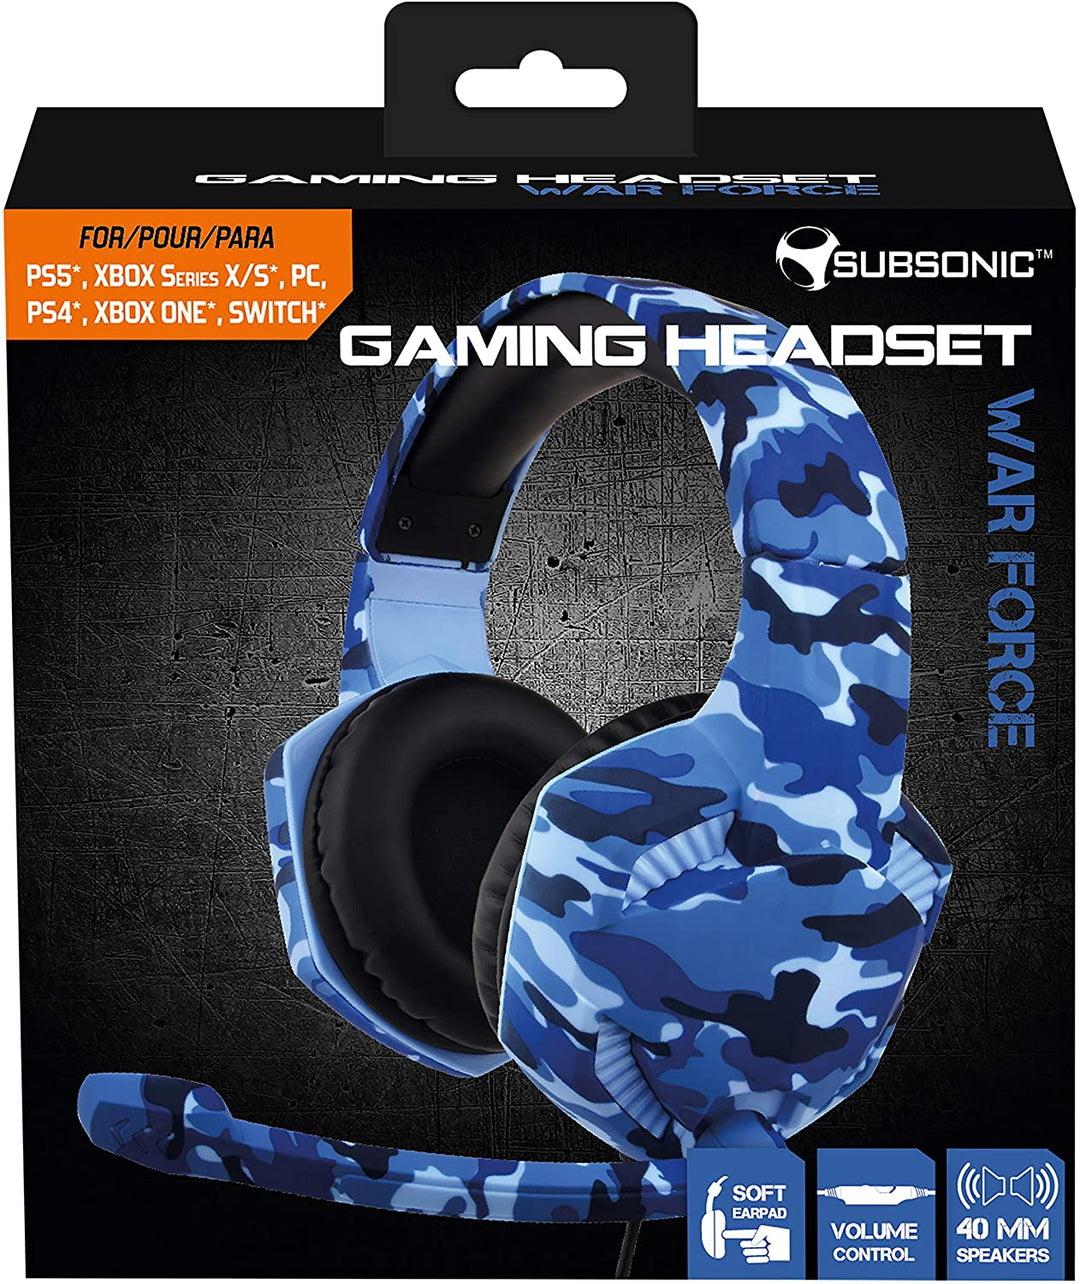 Subsonic - Gaming-Headset War Force für PS4 / Xbox One / PC / Switch